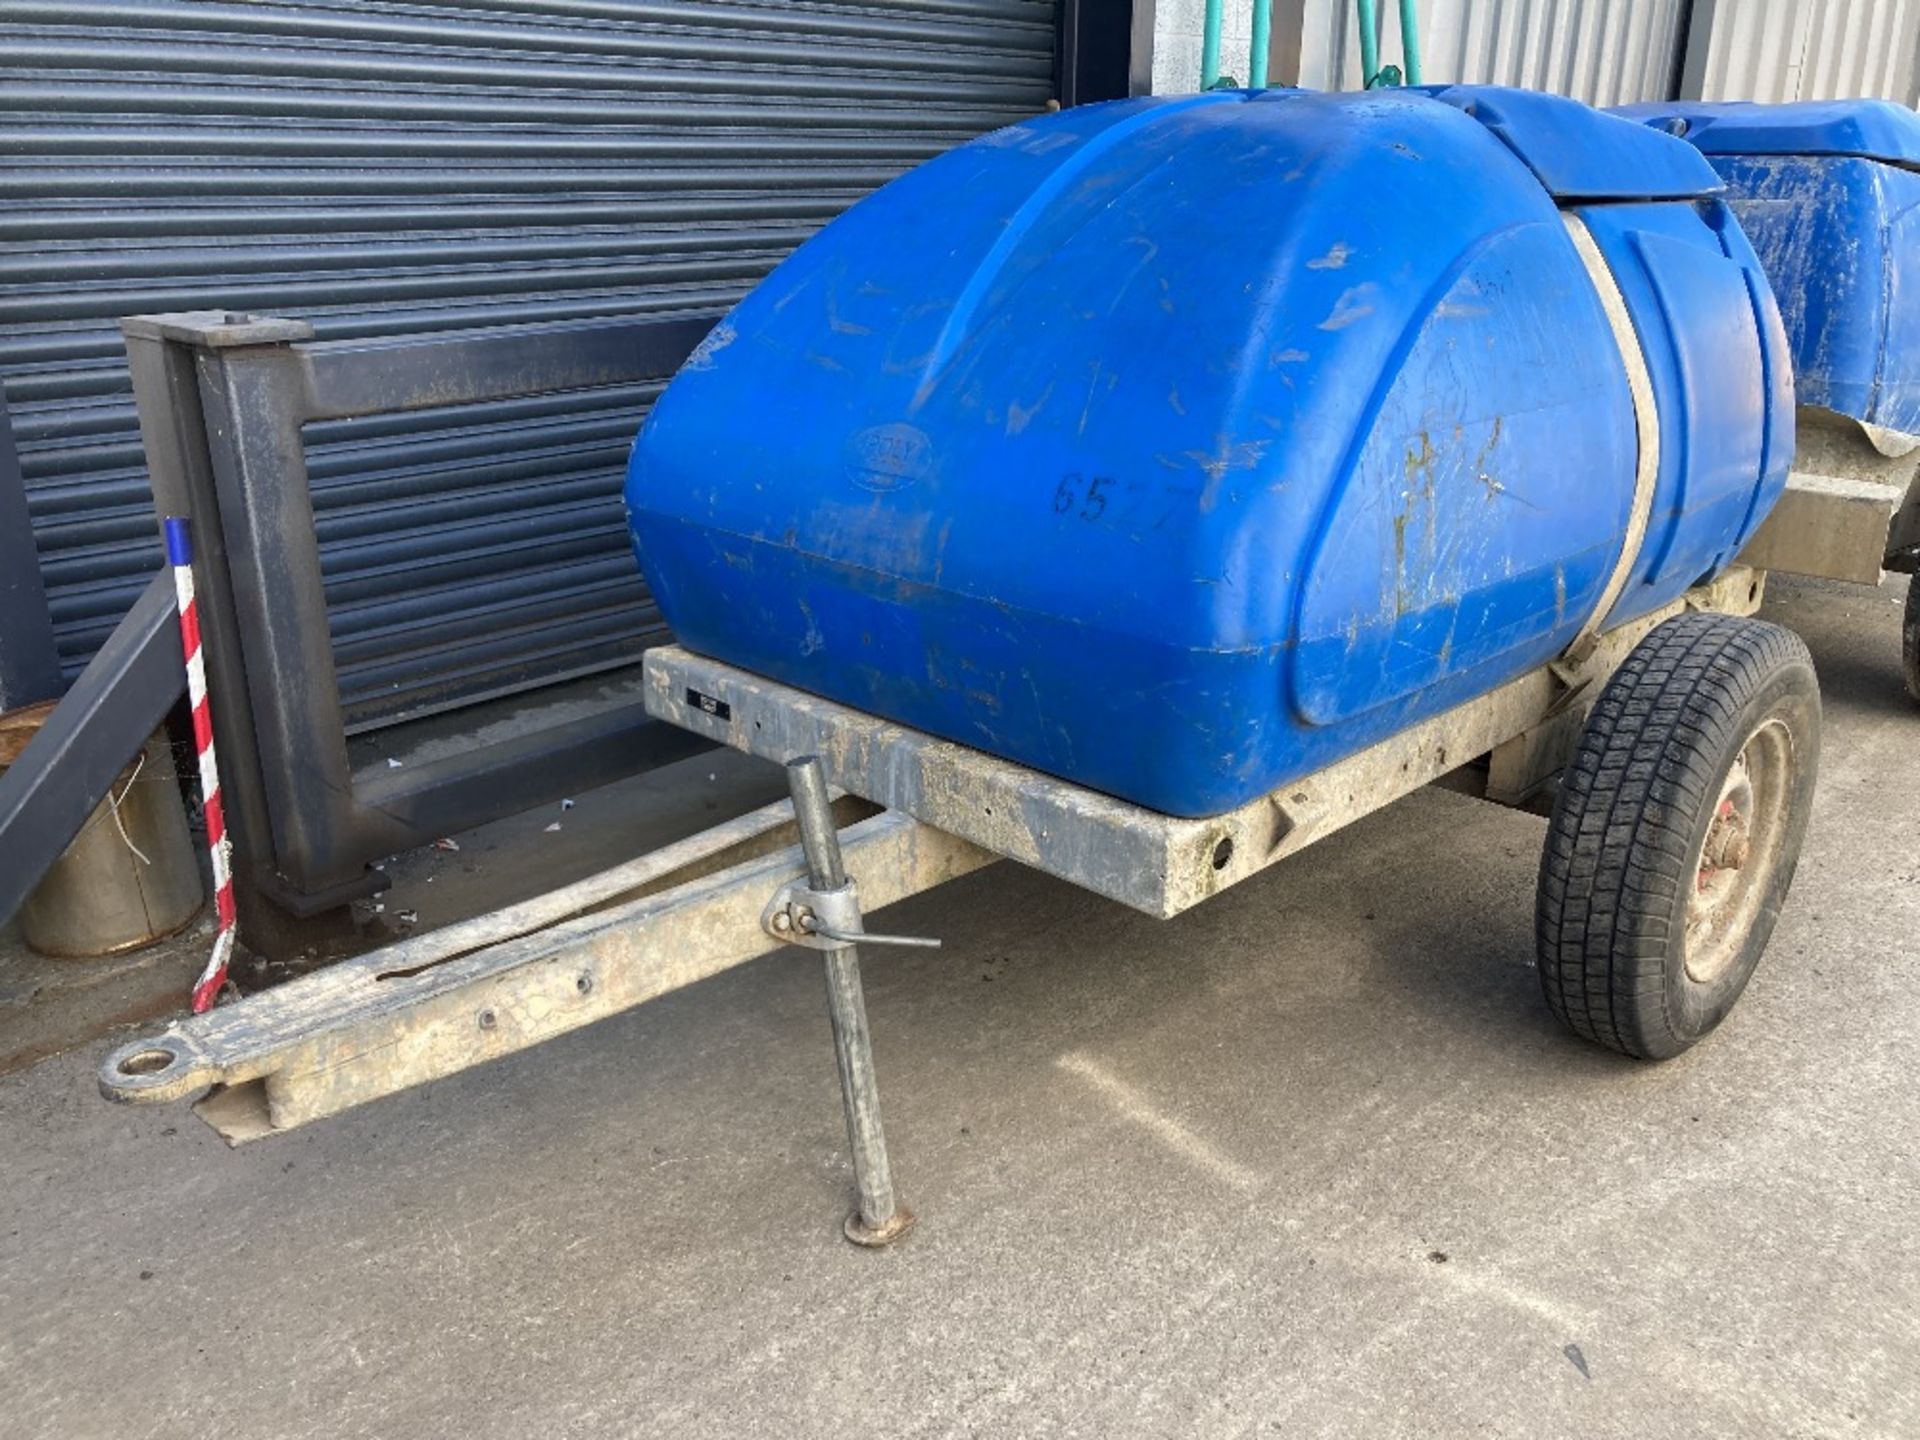 Western Tanks 1,000ltr Water Bowser - Image 2 of 5